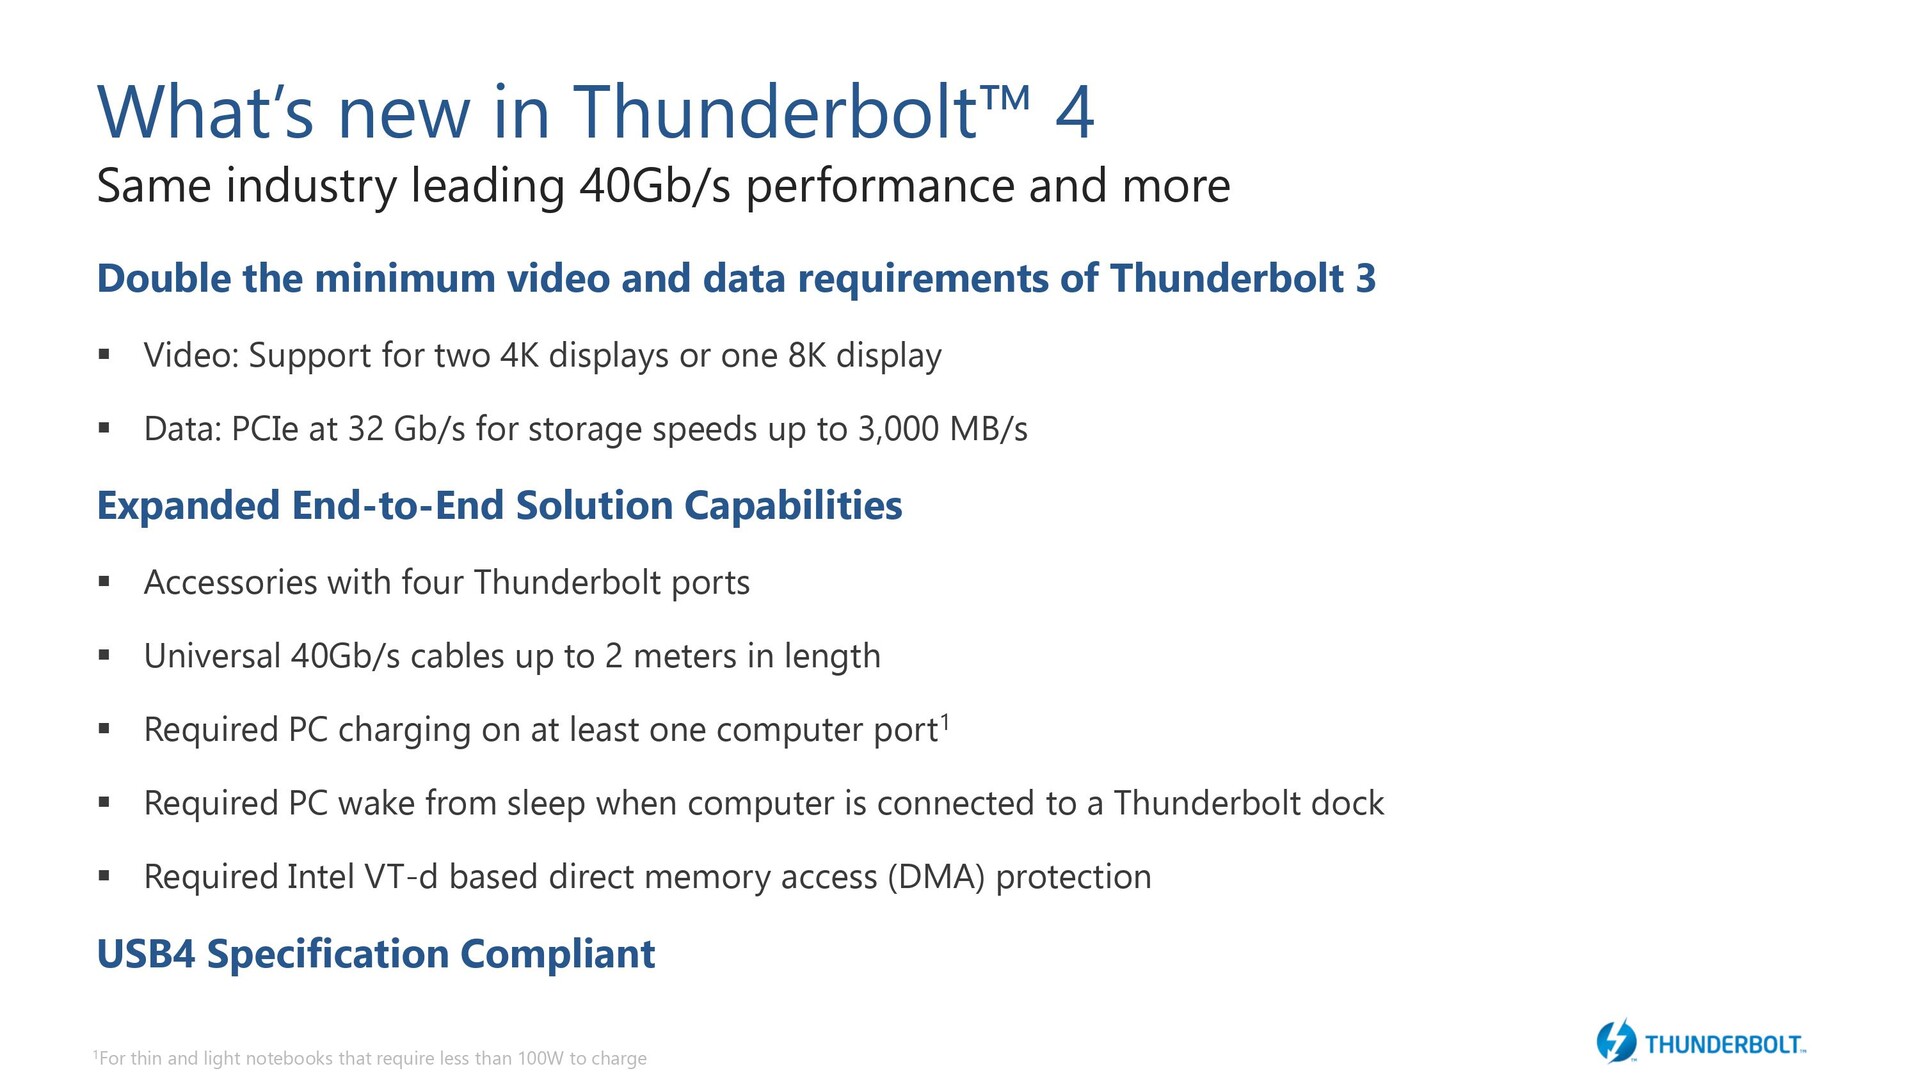 Intel unveils the Thunderbolt 4 spec, which AMD believes it can use